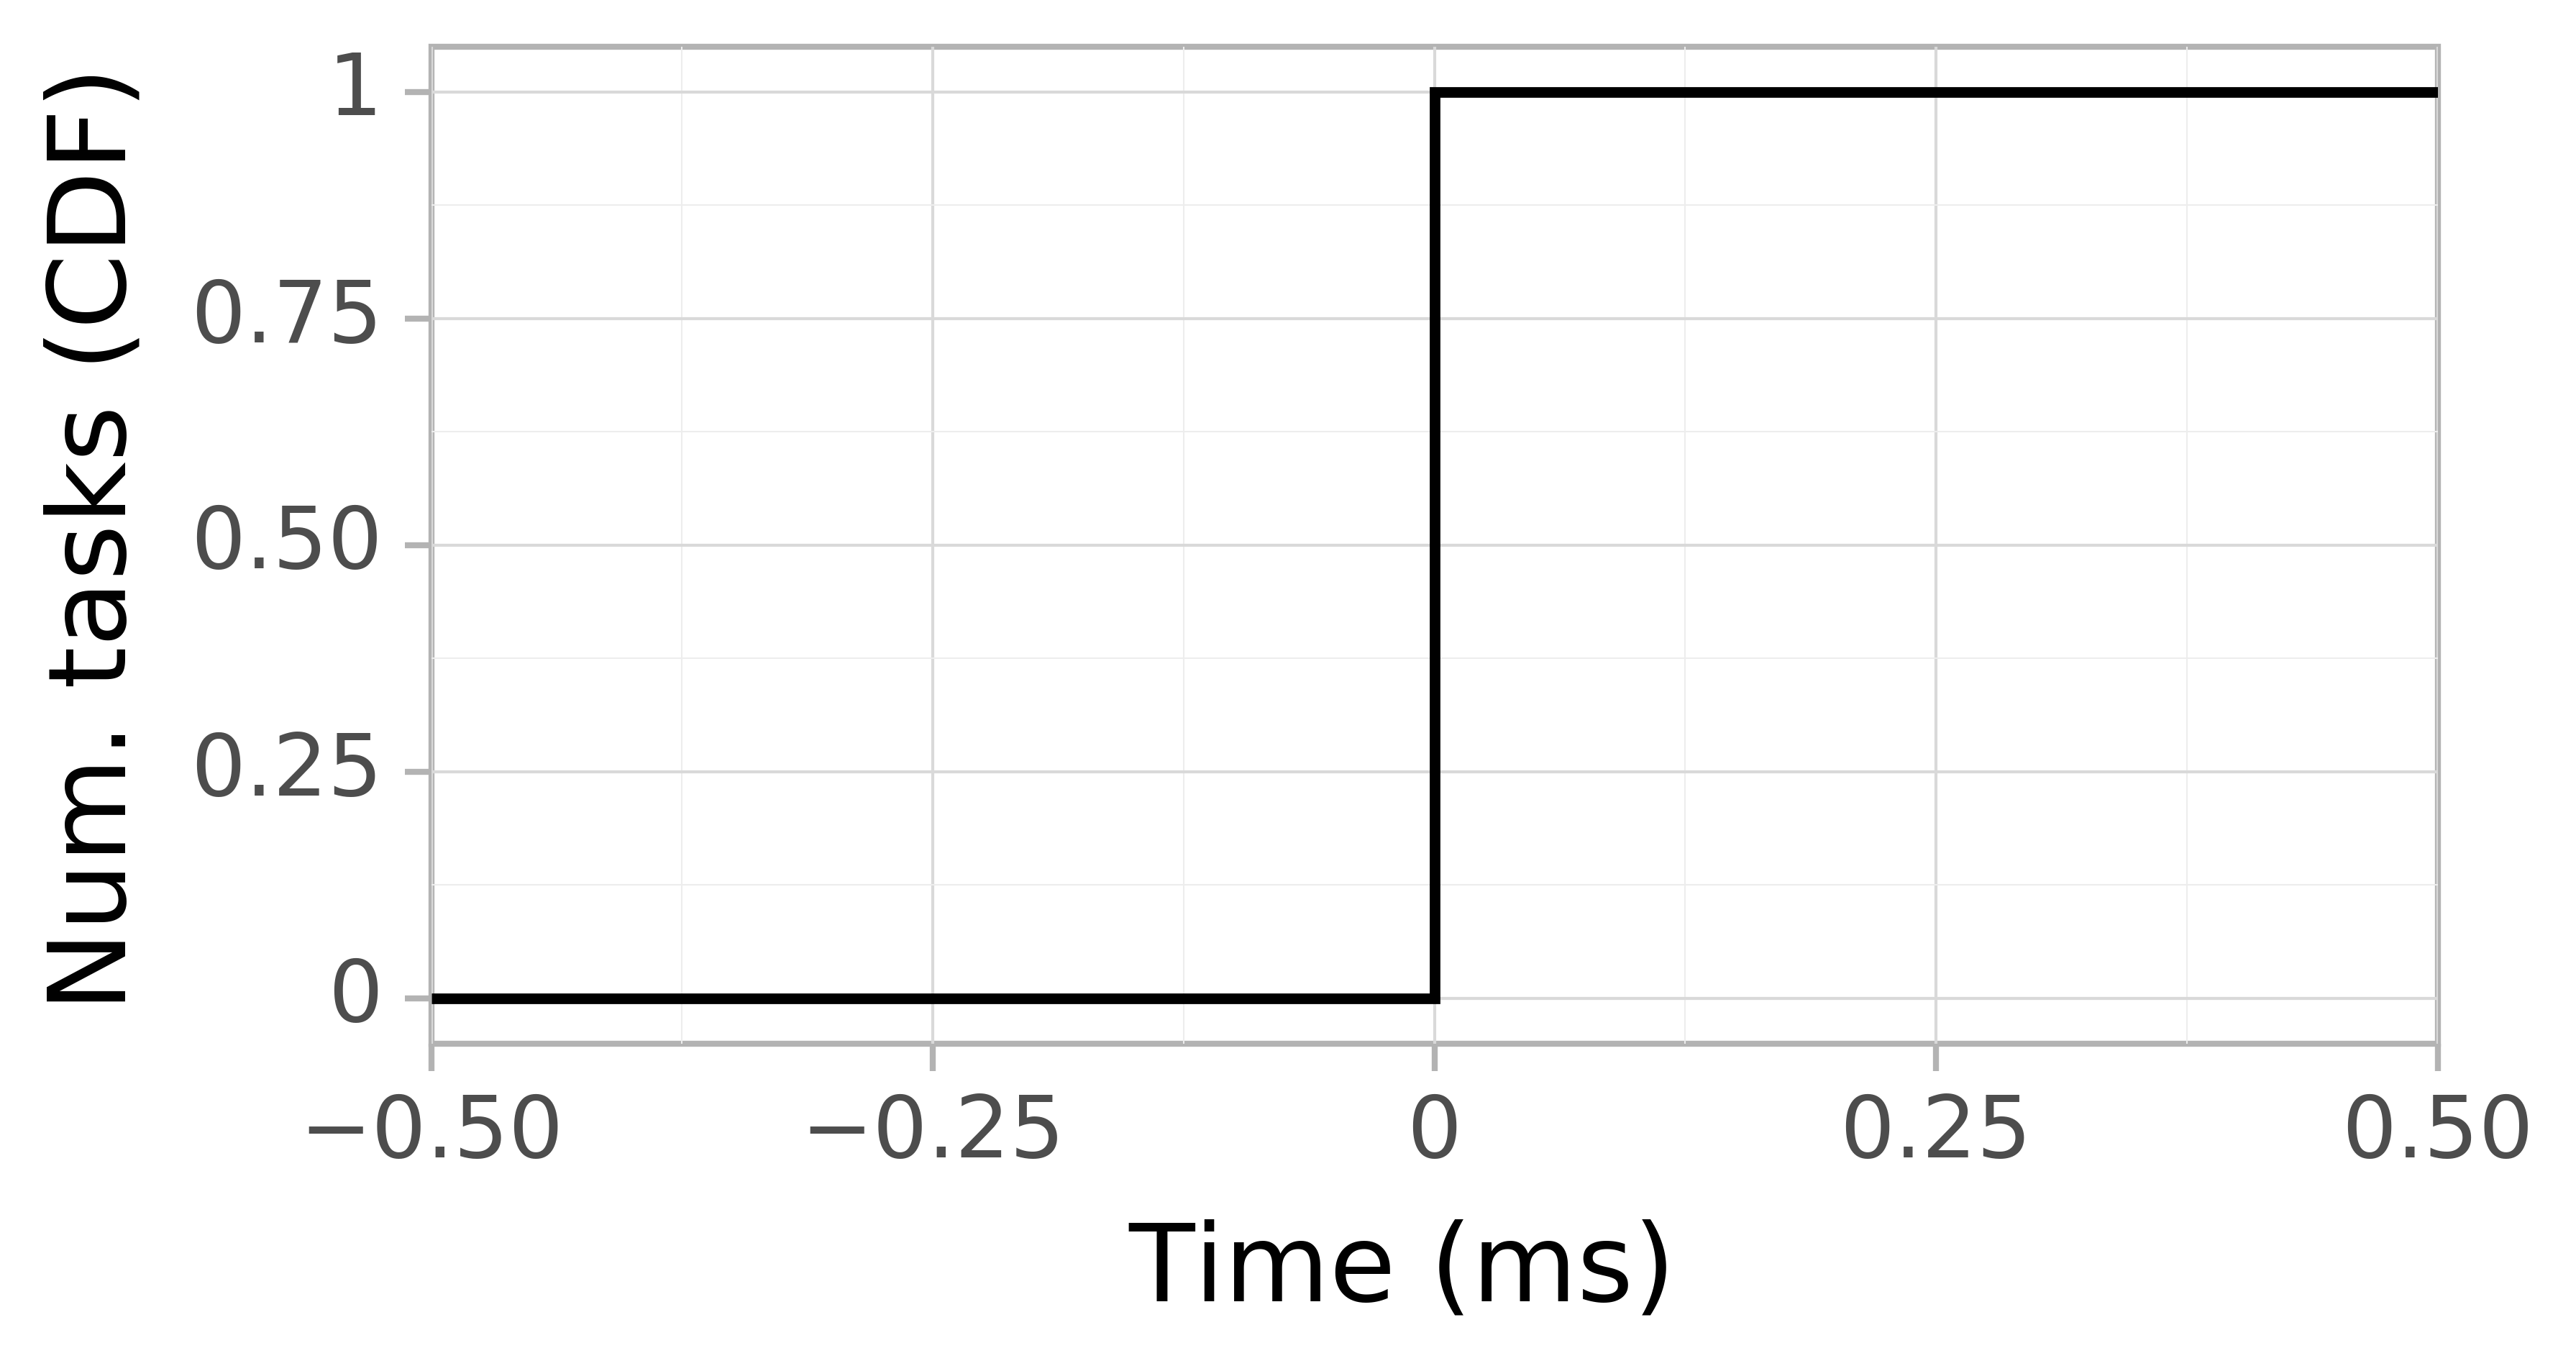 Task arrival CDF graph for the spec_trace-1 trace.